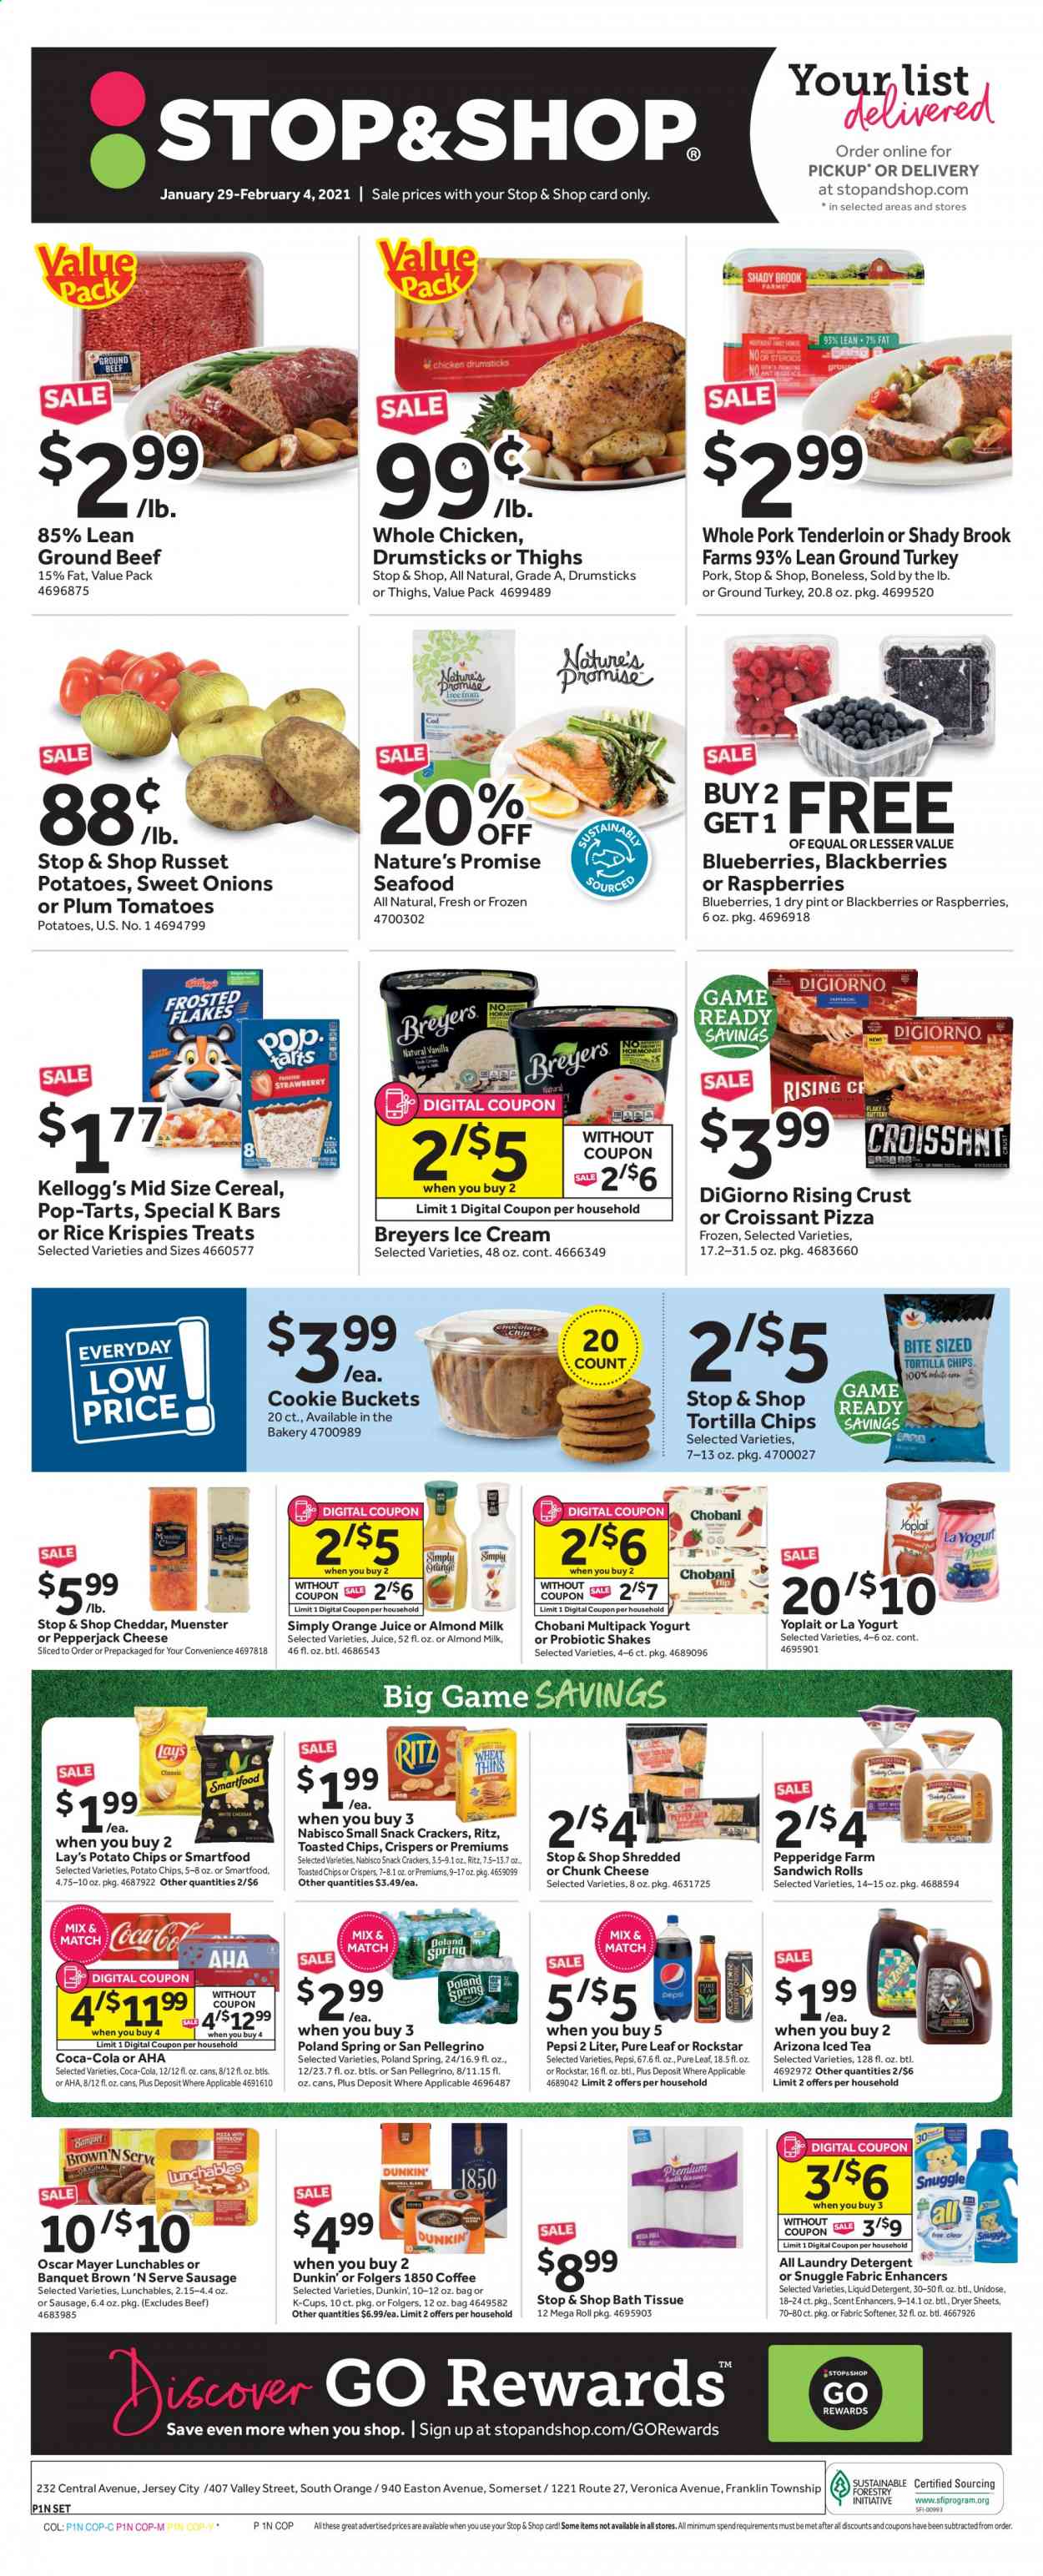 thumbnail - Stop & Shop Flyer - 01/29/2021 - 02/04/2021 - Sales products - blackberries, blueberries, raspberries, Nature’s Promise, croissant, ground turkey, whole chicken, beef meat, ground beef, pork meat, pork tenderloin, seafood, pizza, Lunchables, Oscar Mayer, sausage, Brown 'N Serve, cheddar, Pepper Jack cheese, cheese, Münster cheese, chunk cheese, yoghurt, Yoplait, Chobani, almond milk, shake, ice cream, crackers, Kellogg's, Pop-Tarts, RITZ, tortilla chips, potato chips, snack, Lay’s, Smartfood, cereals, Rice Krispies, Coca-Cola, Pepsi, orange juice, juice, AriZona, Rockstar, Pure Leaf, Folgers, coffee capsules, K-Cups, bath tissue, Snuggle, fabric softener, laundry detergent, dryer sheets, liquid detergent. Page 1.